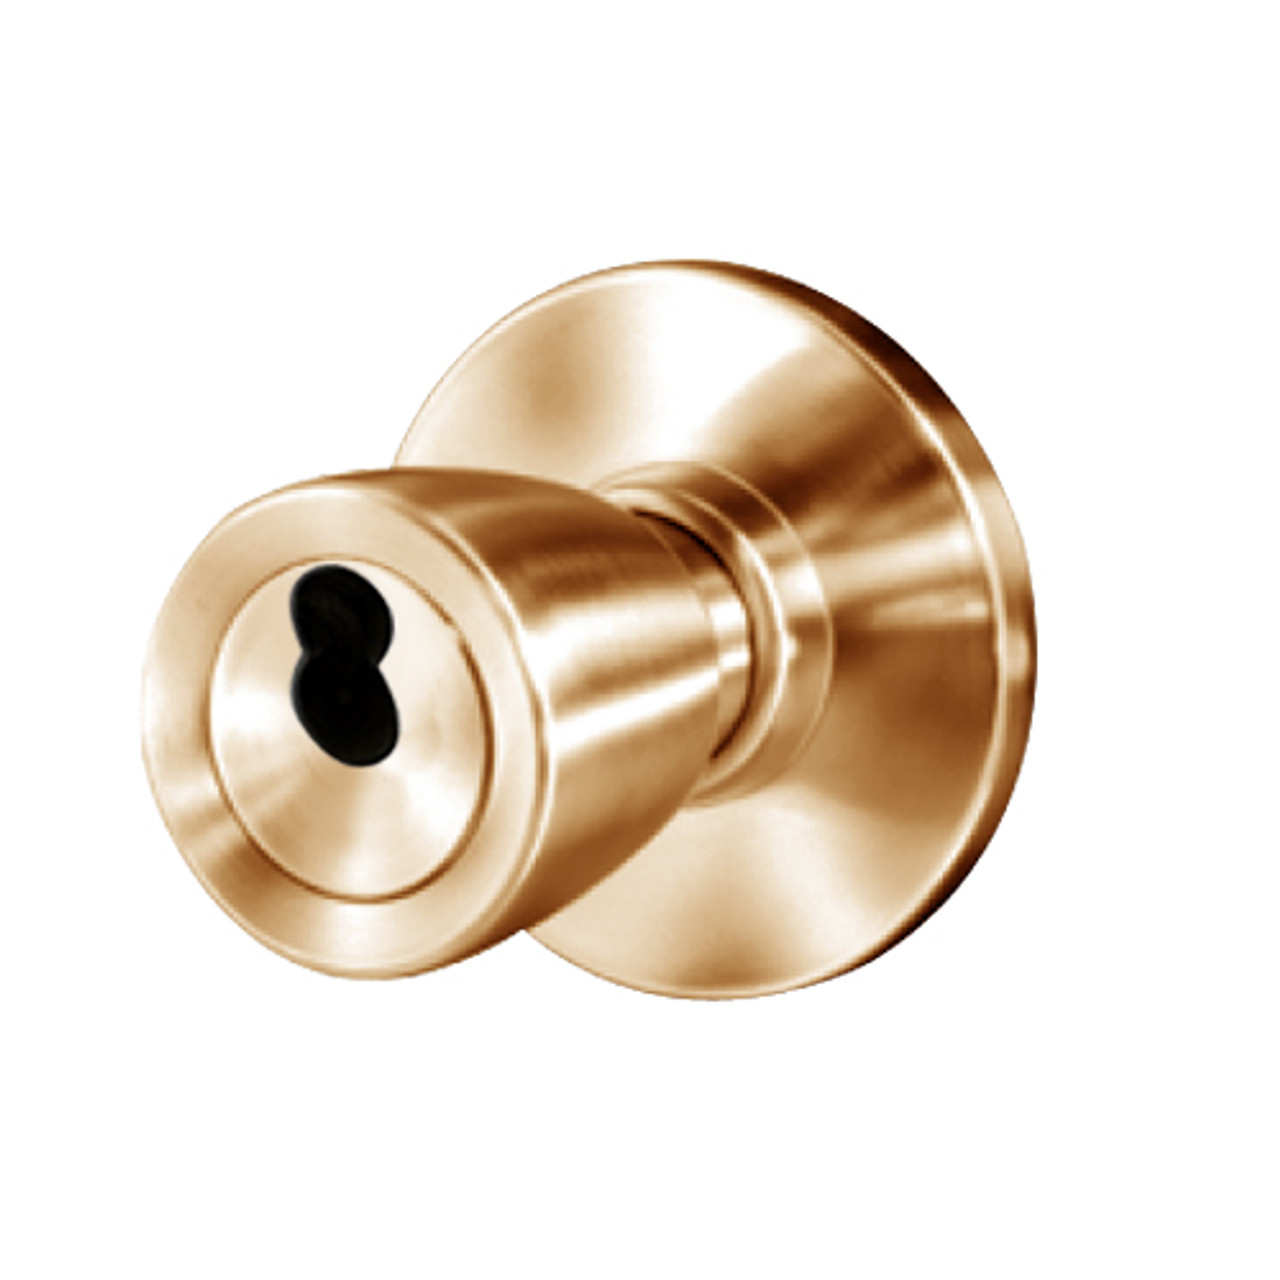 8K47YR6AS3611 Best 8K Series Exit Heavy Duty Cylindrical Knob Locks with Tulip Style in Bright Bronze